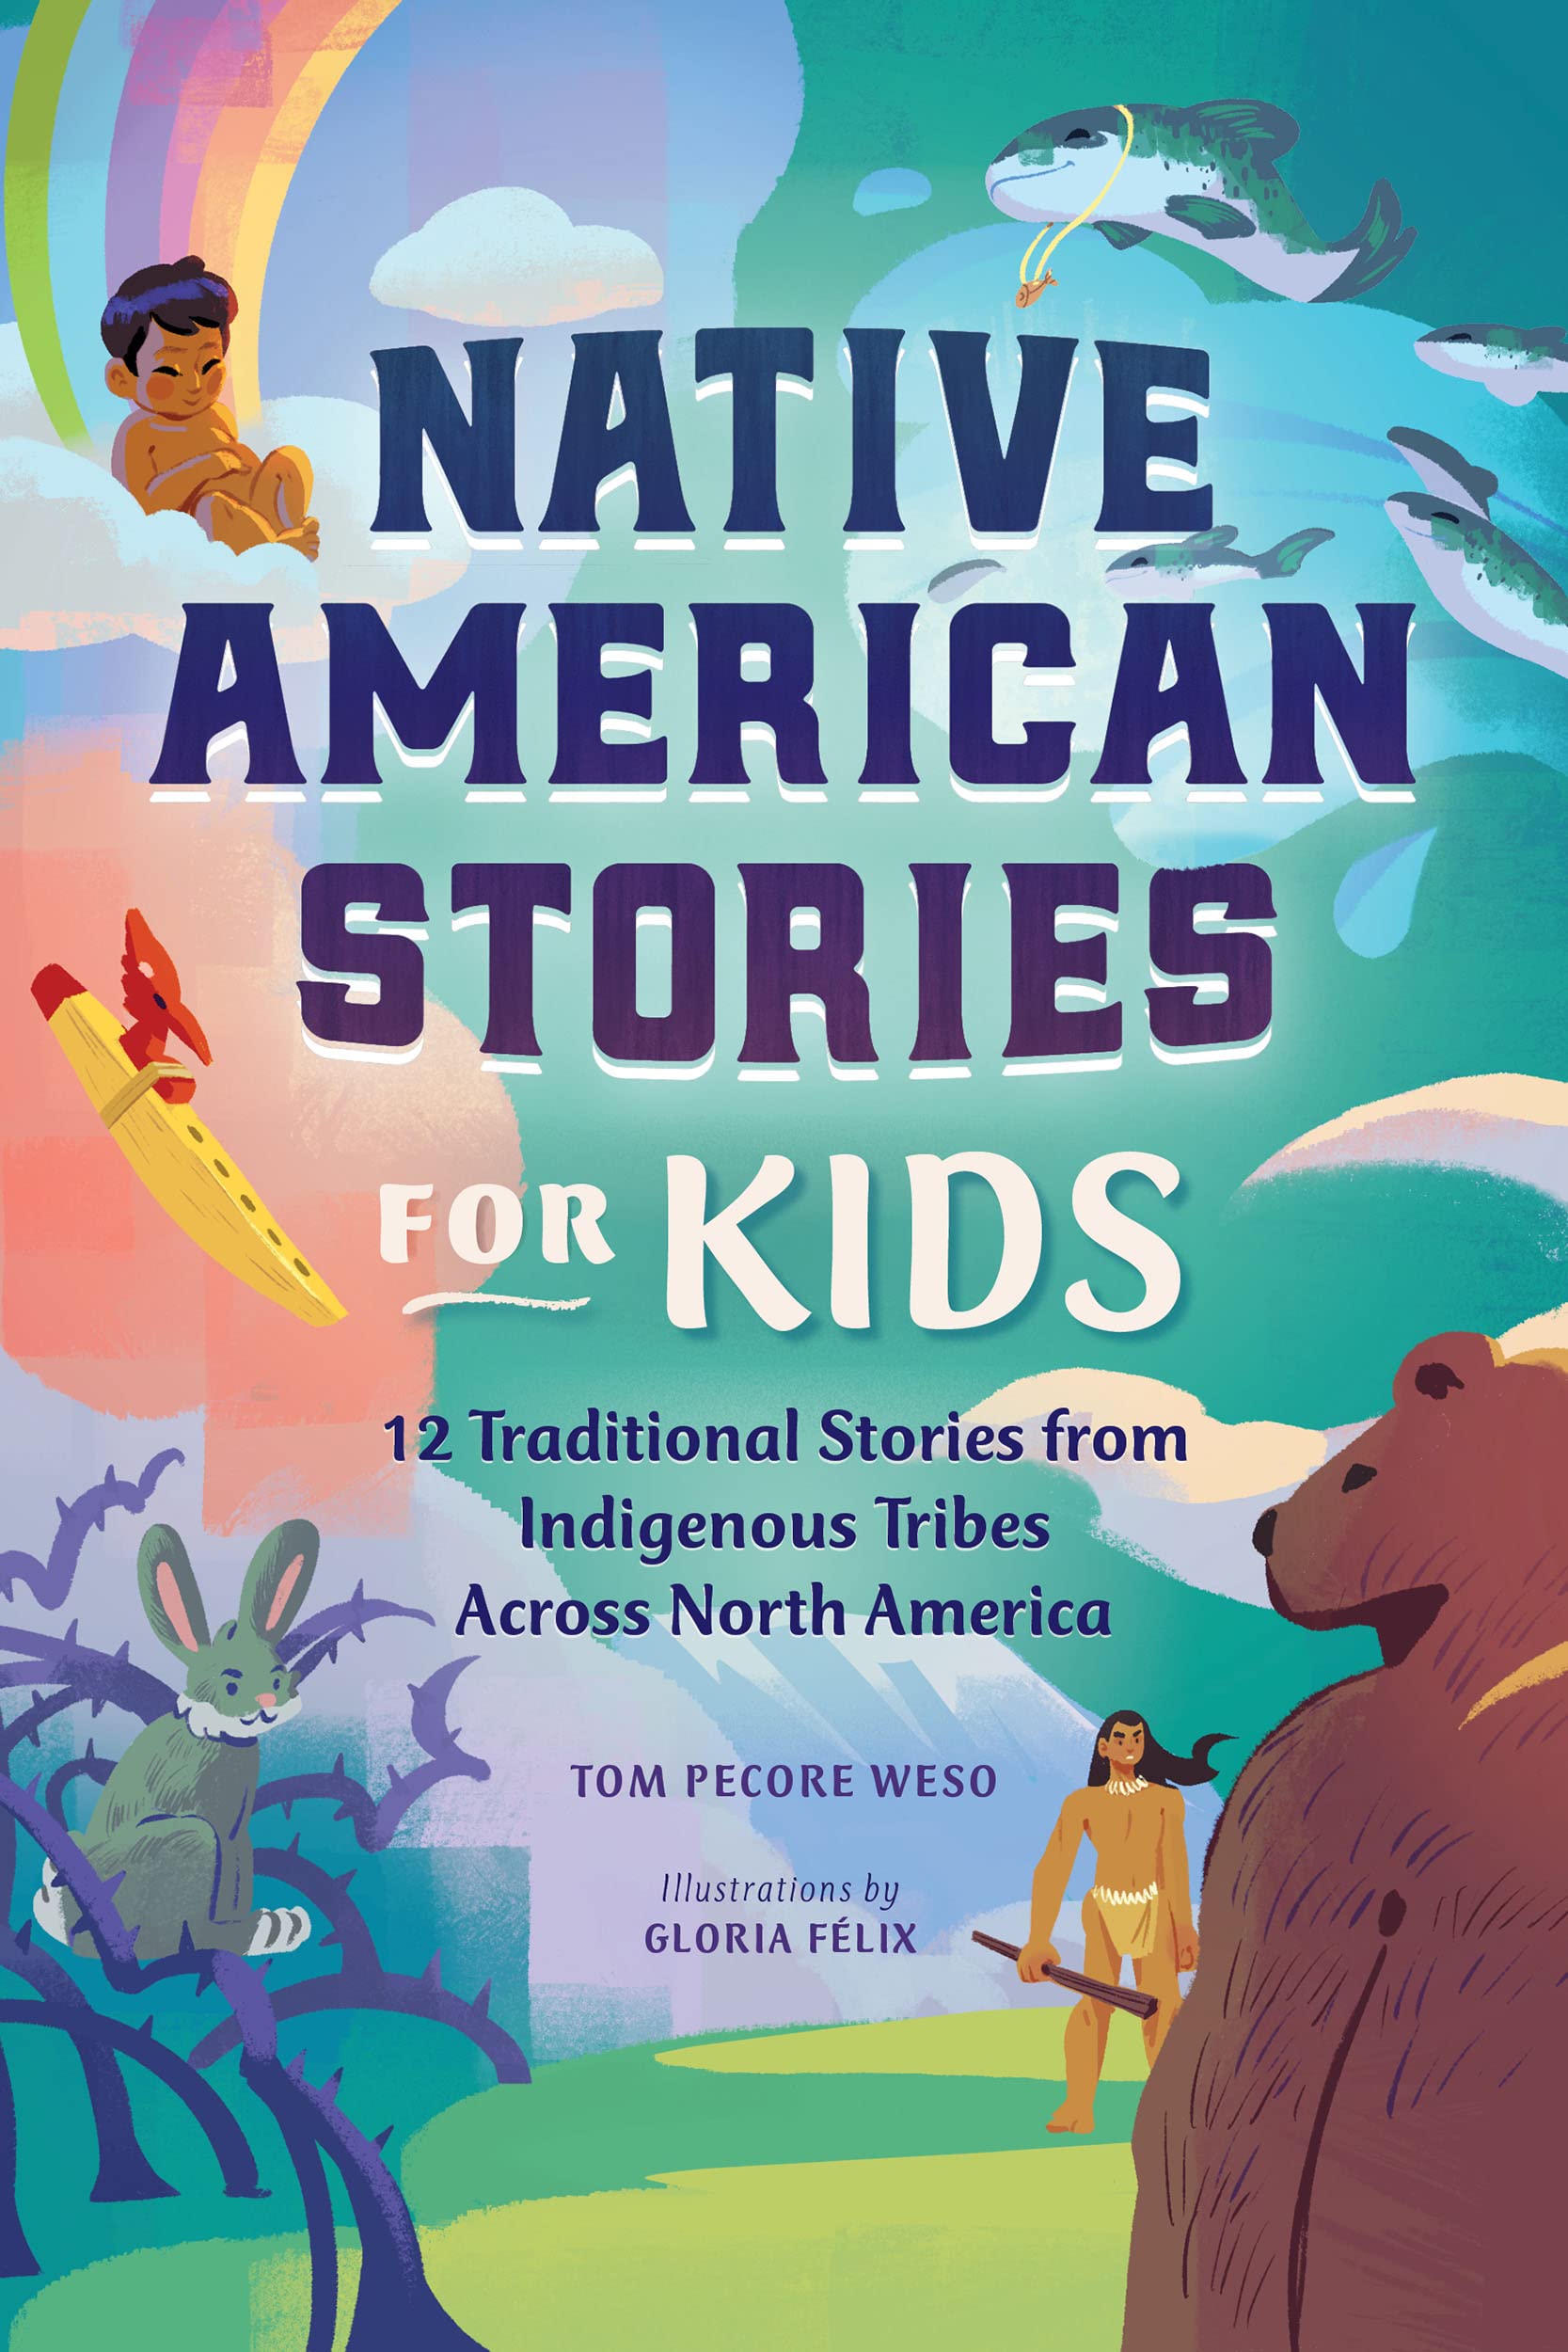 Image for "Native American Stories for Kids"